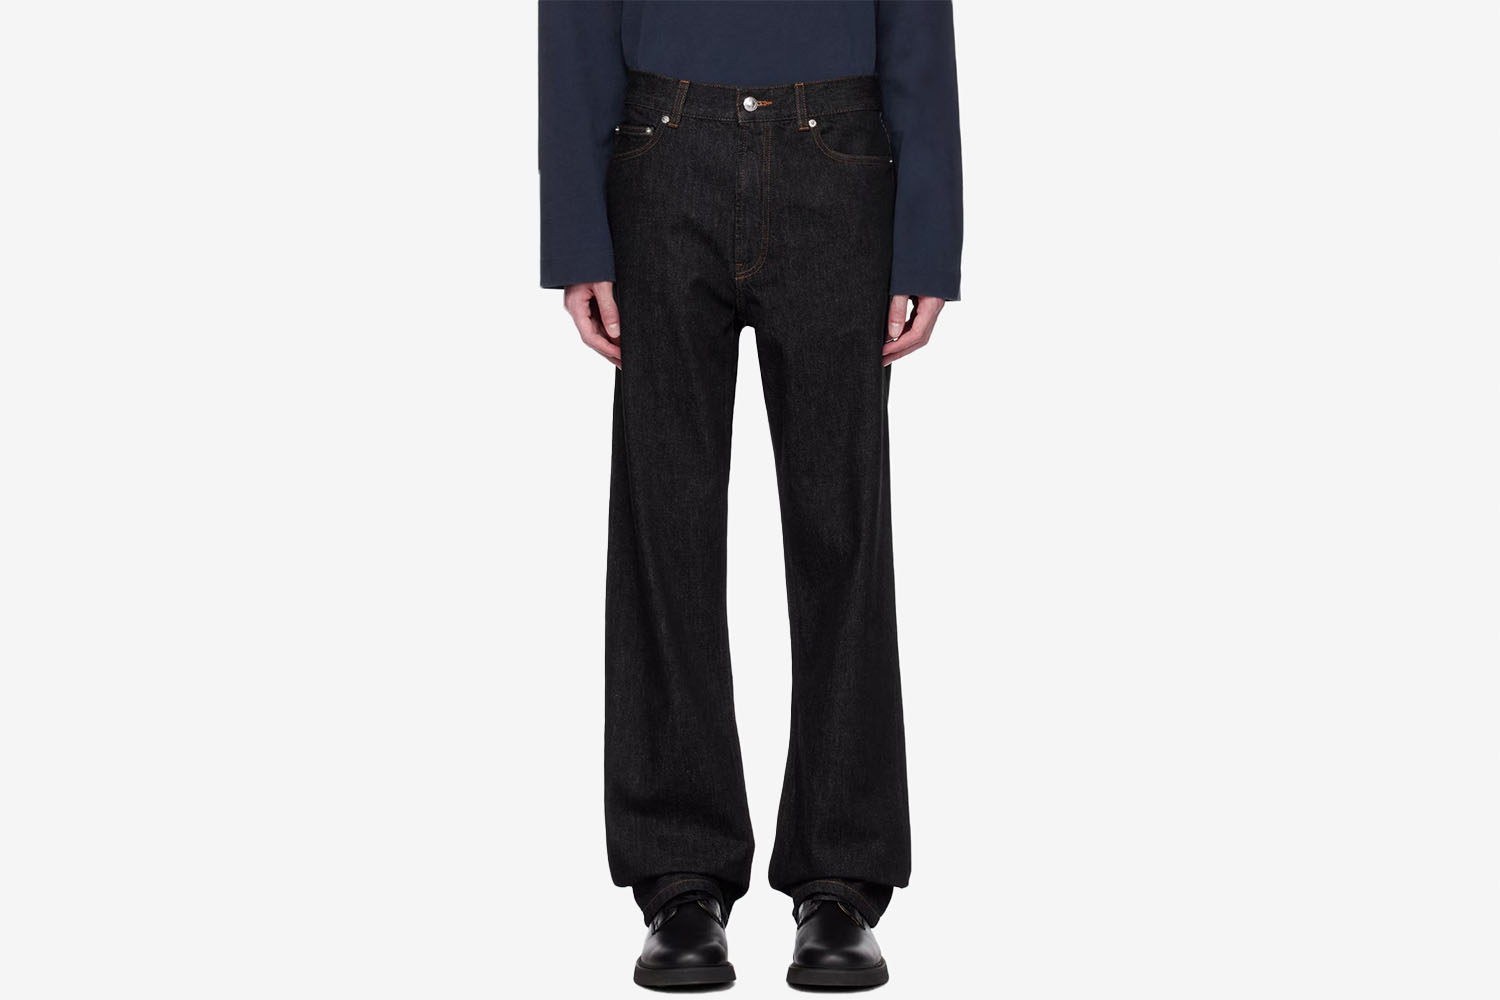 A.P.C. JW Anderson Edition Willie Jeans